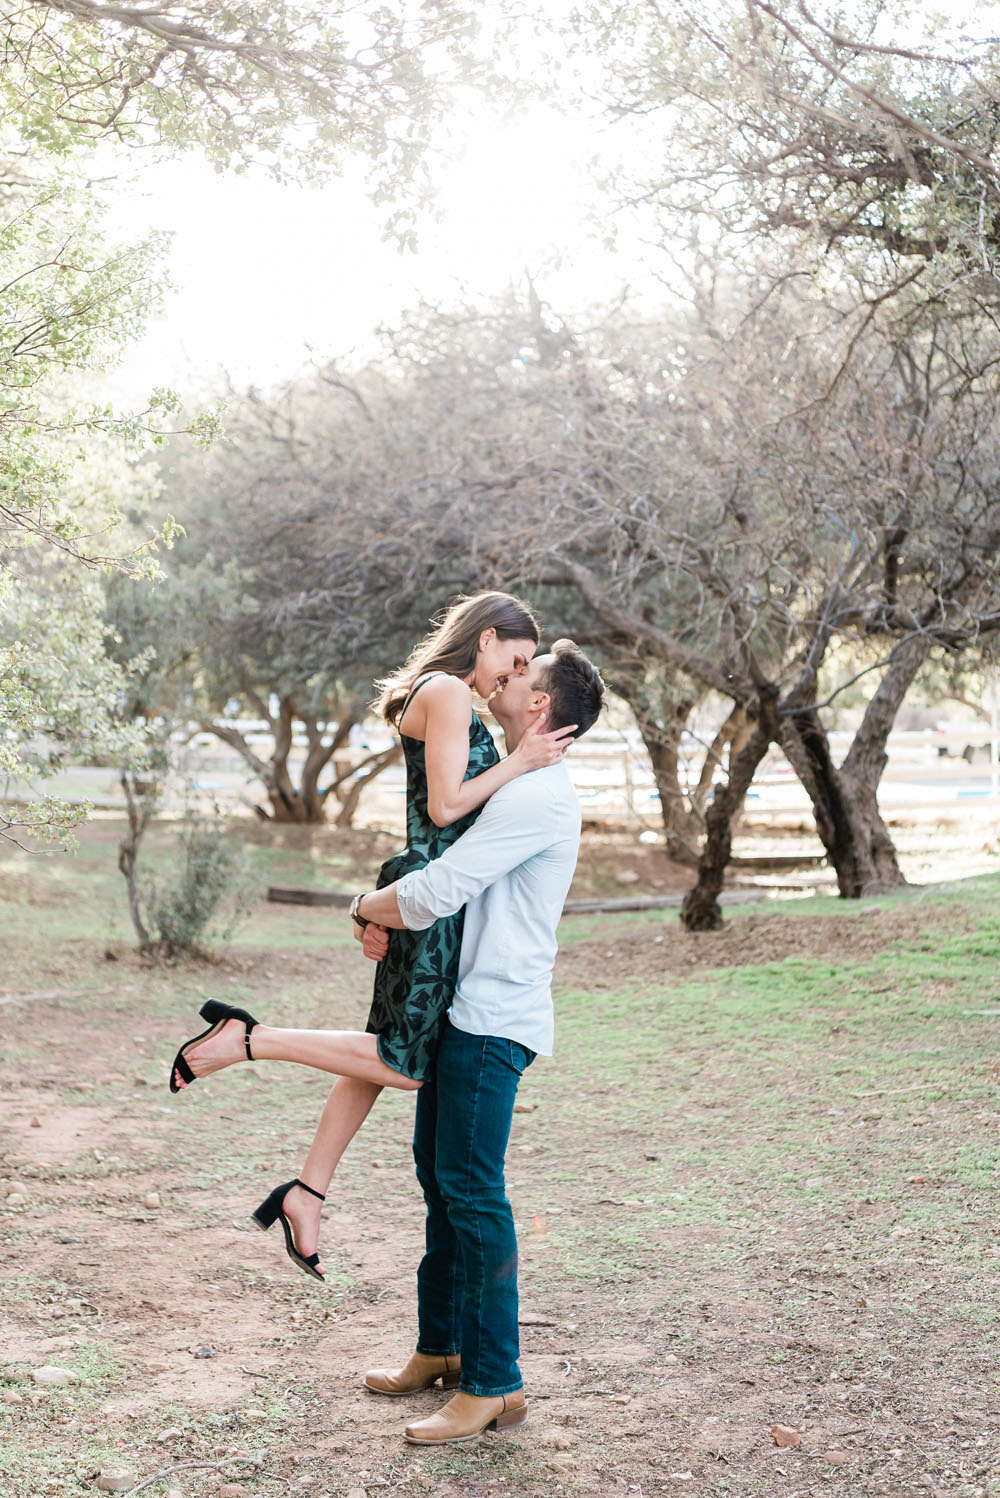 Spring Mountain Ranch Engagement Session | Kristen Marie Weddings + Portraits